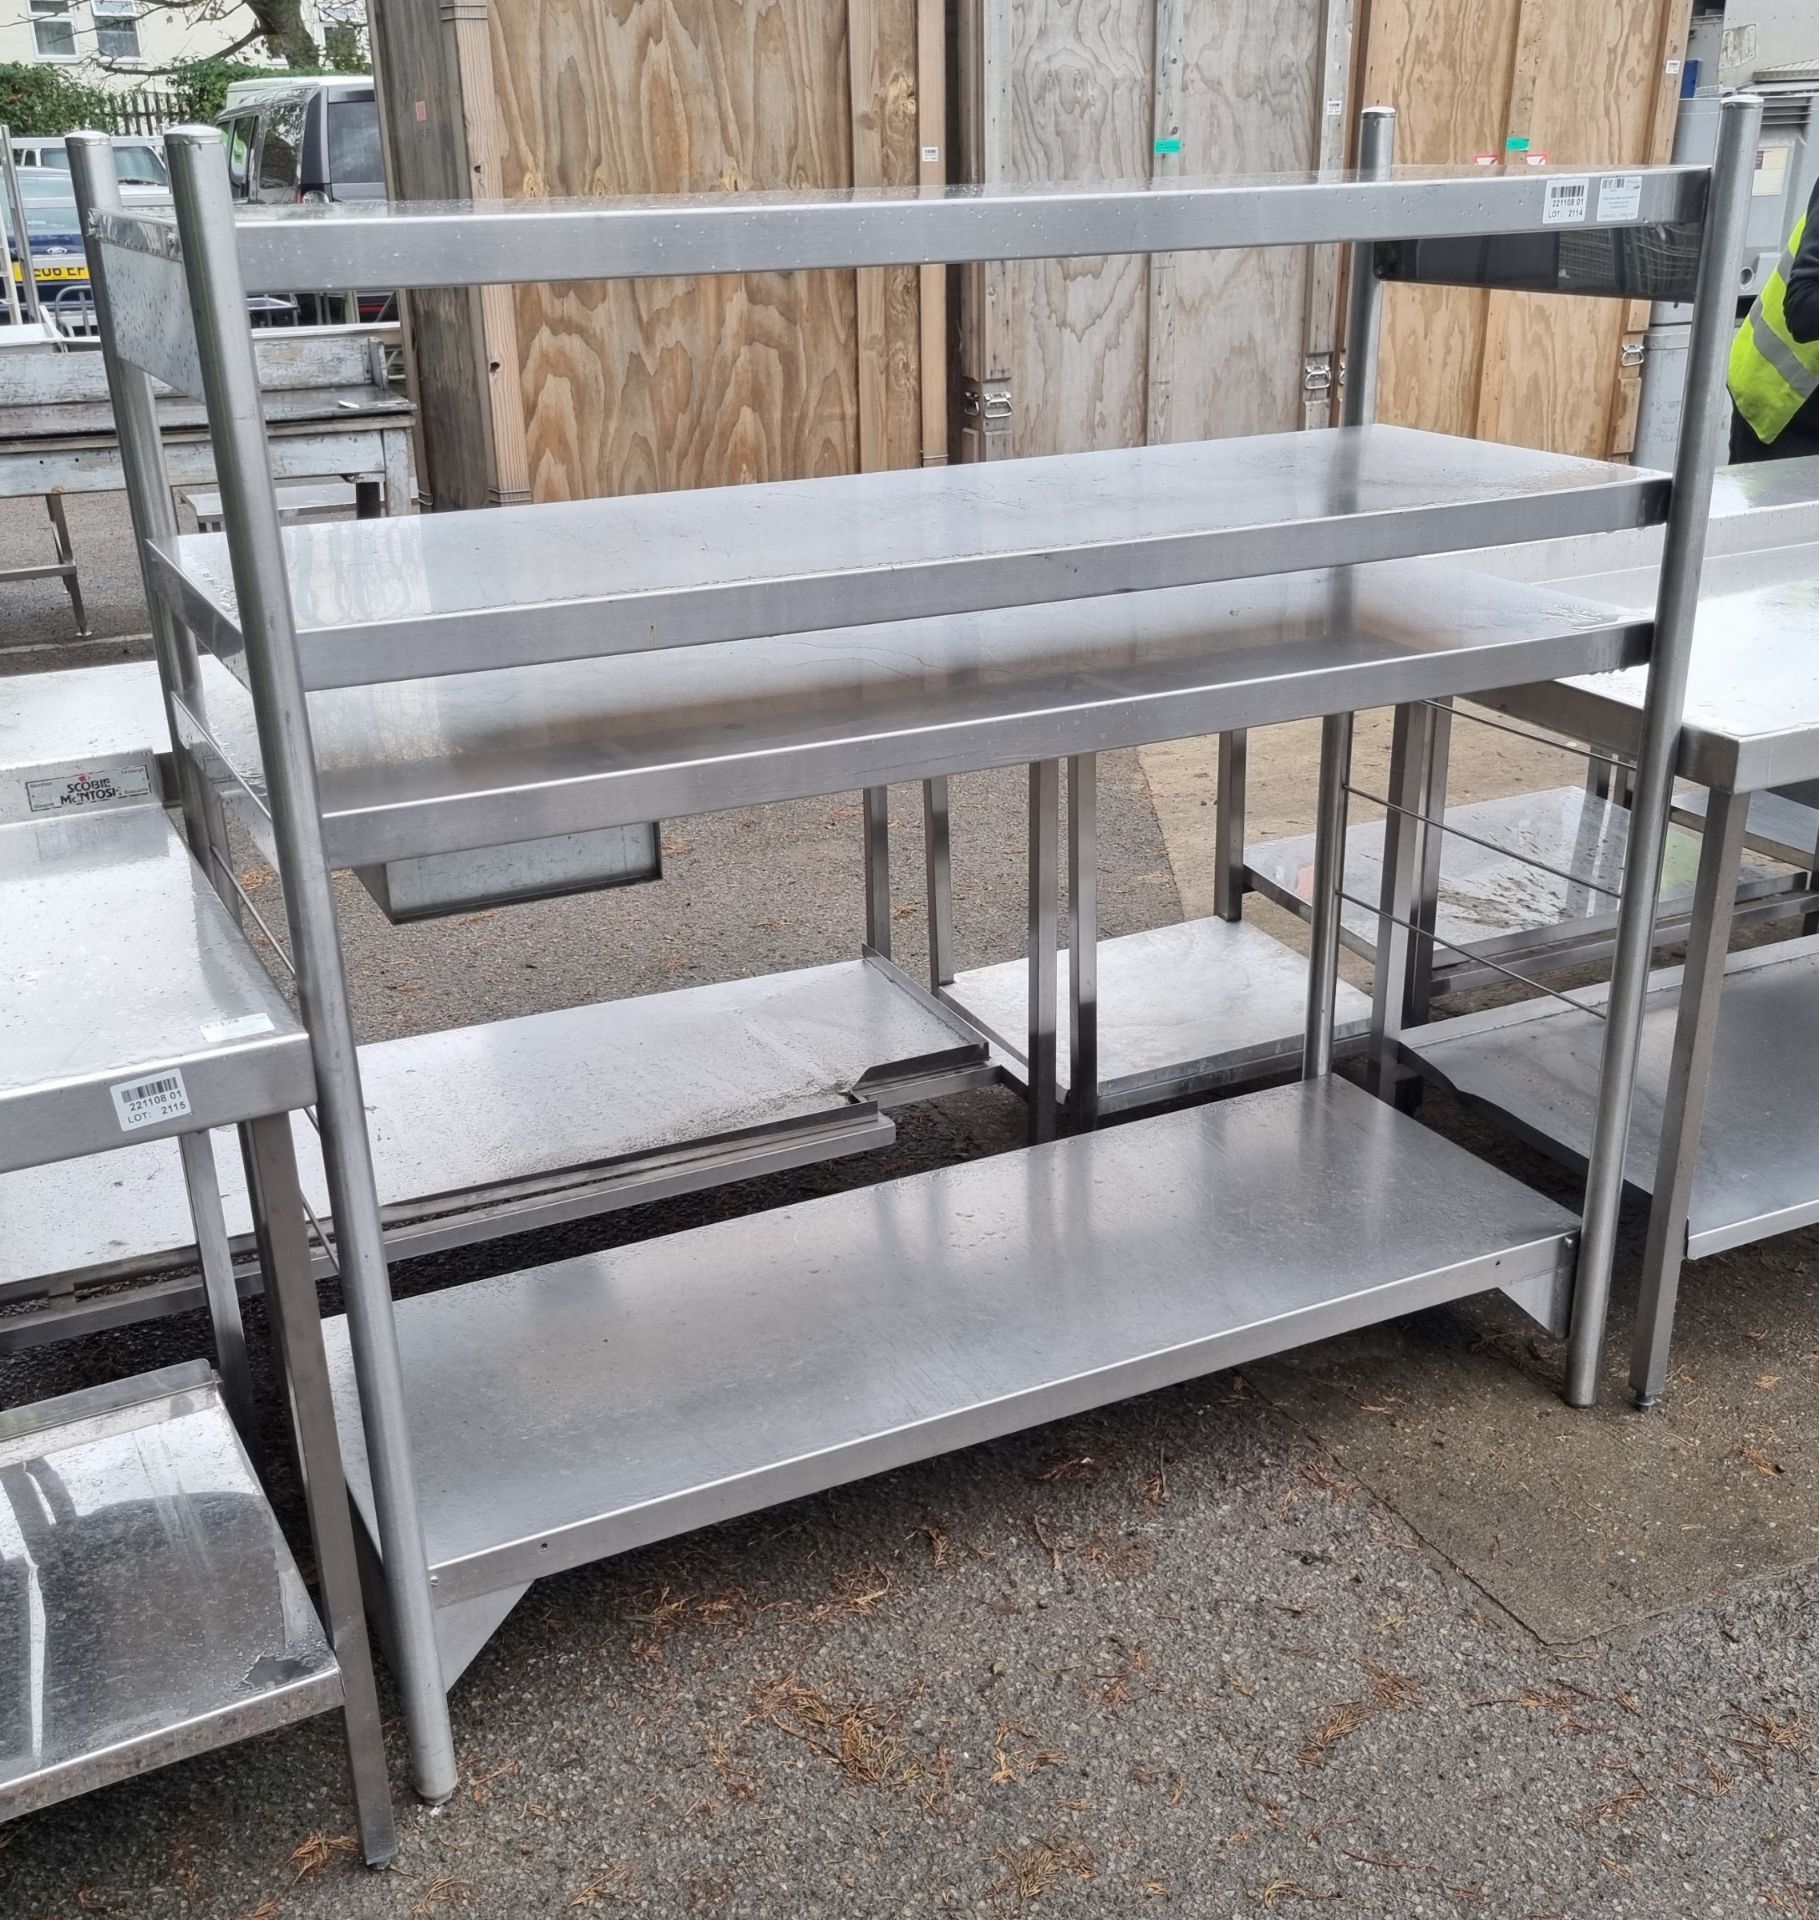 Stainless steel adjustable 4 tier shelving unit - 150x60x150cm - Image 3 of 3